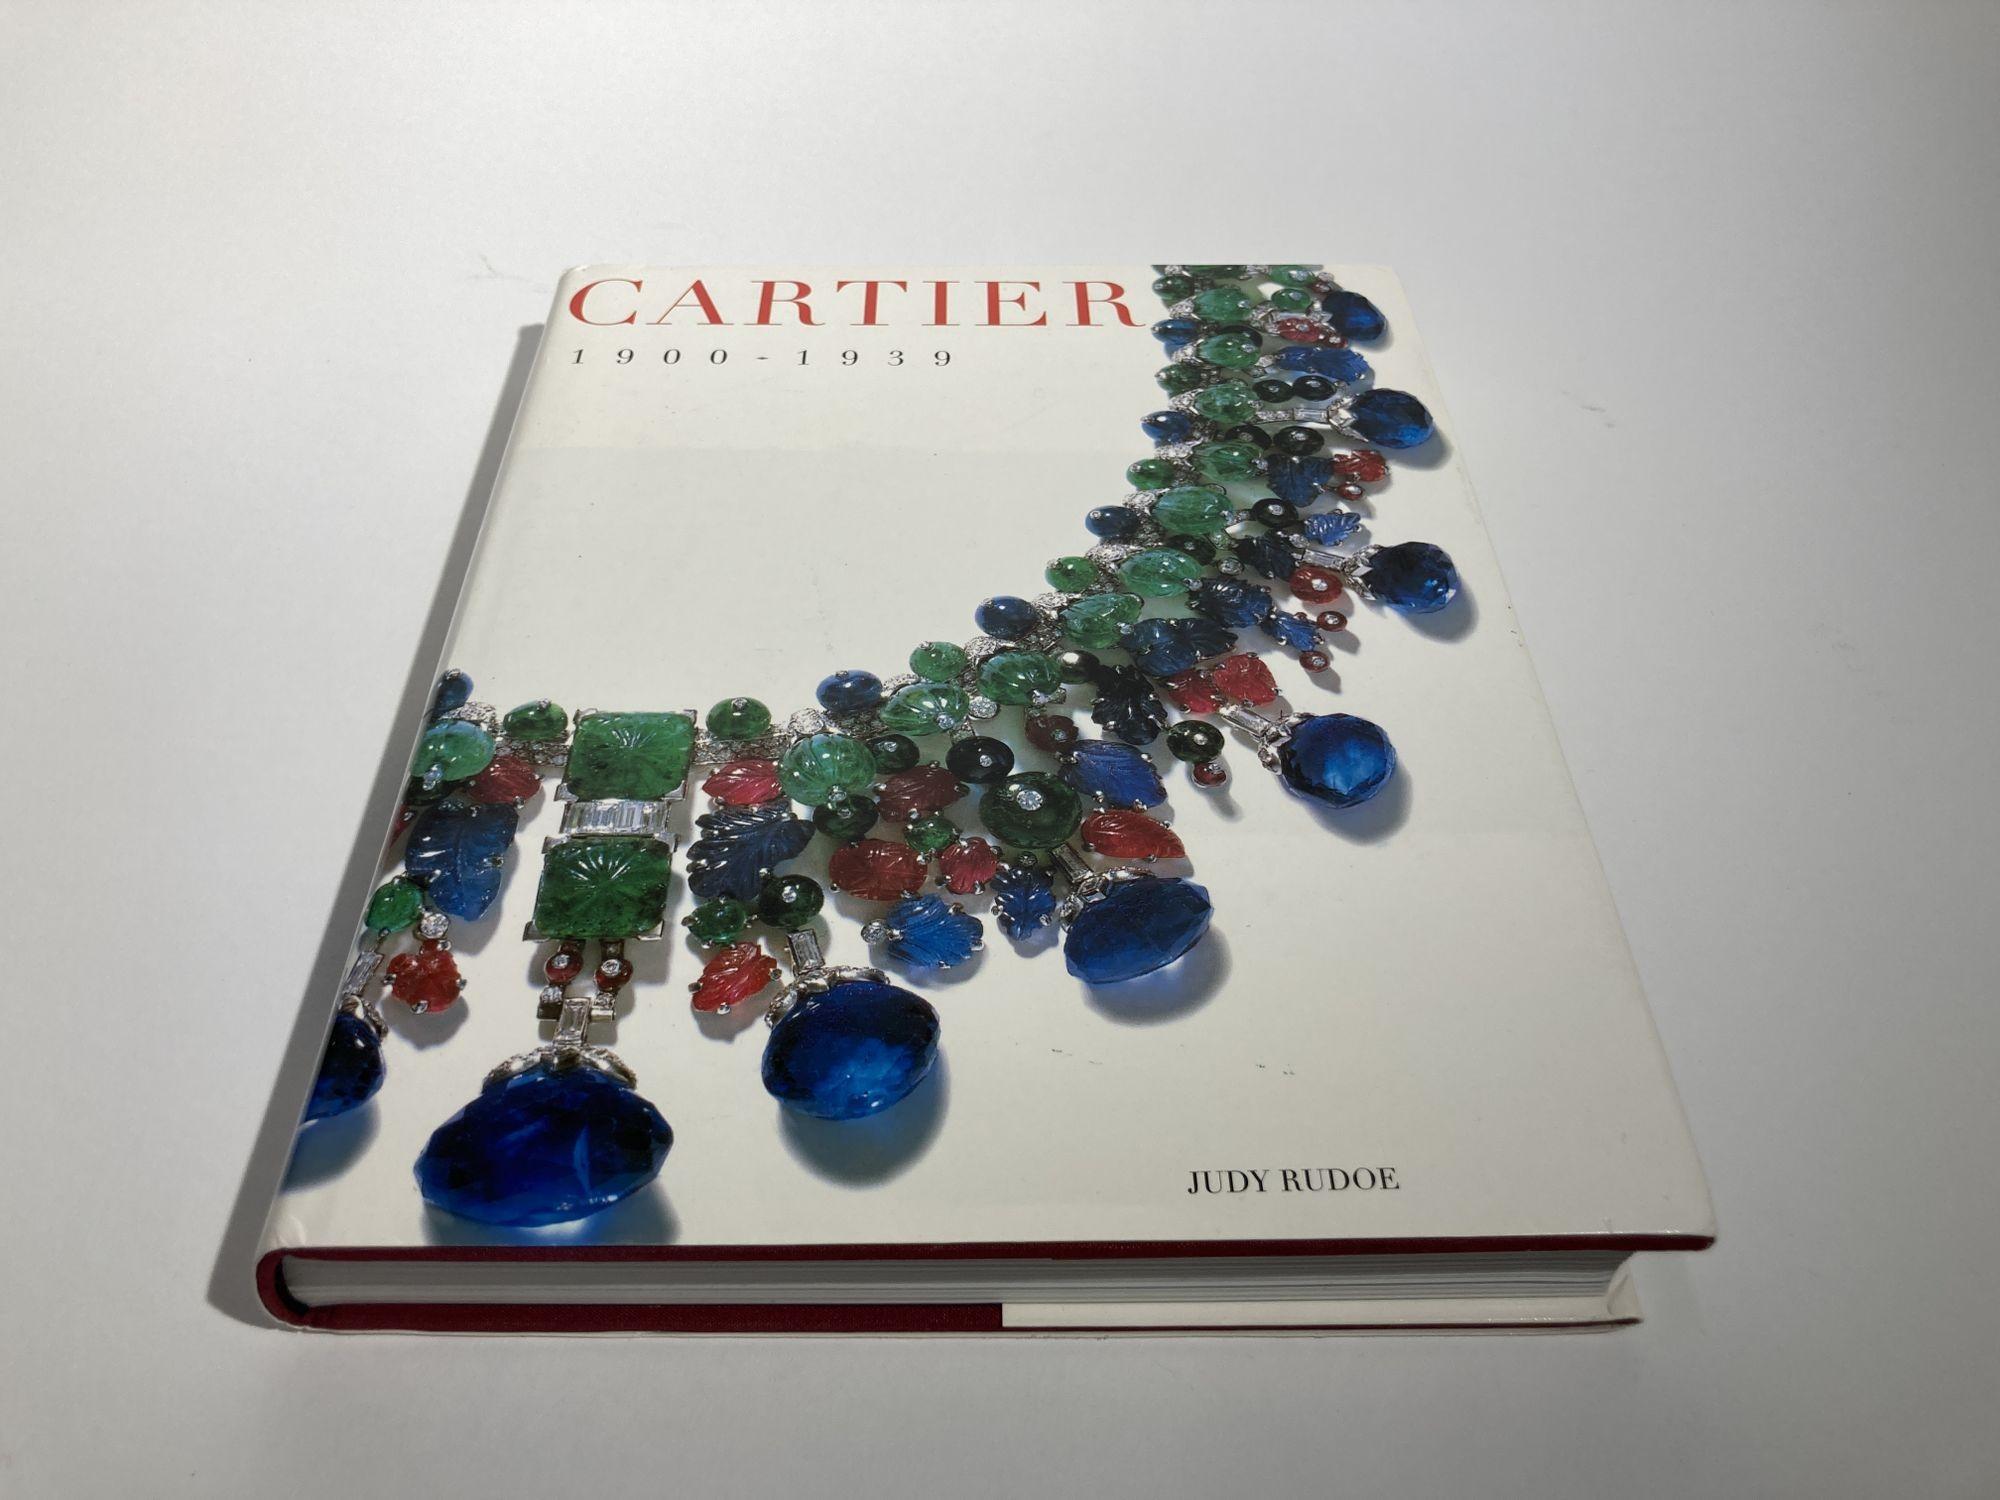 Cartier 1900 to 1939 Hardcover Book
This sumptuous volume surveys spectacular creations from the first four decades of the 20th century, when the renowned Paris-based firm known as Cartier expanded to London and New York. Specially taken